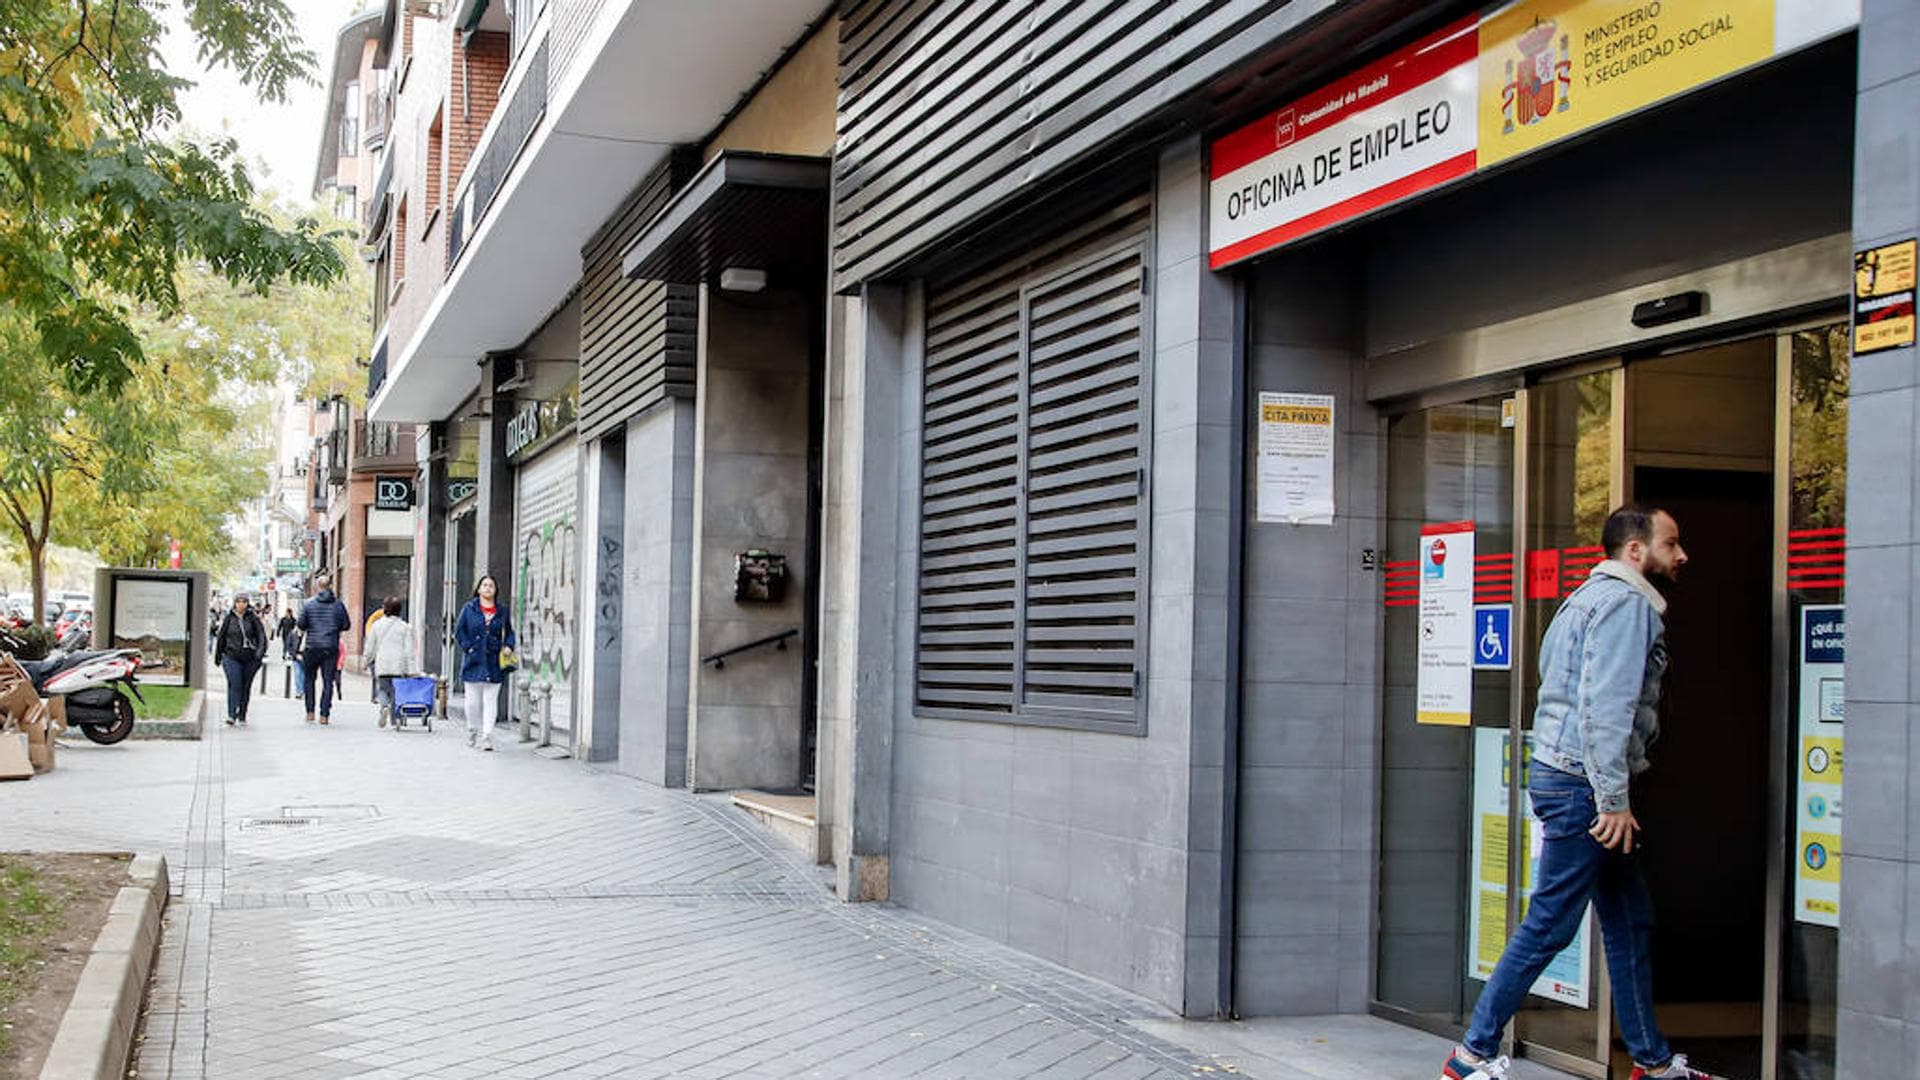 Spain, leader in youth unemployment with a rate of 27% that doubles that of the eurozone